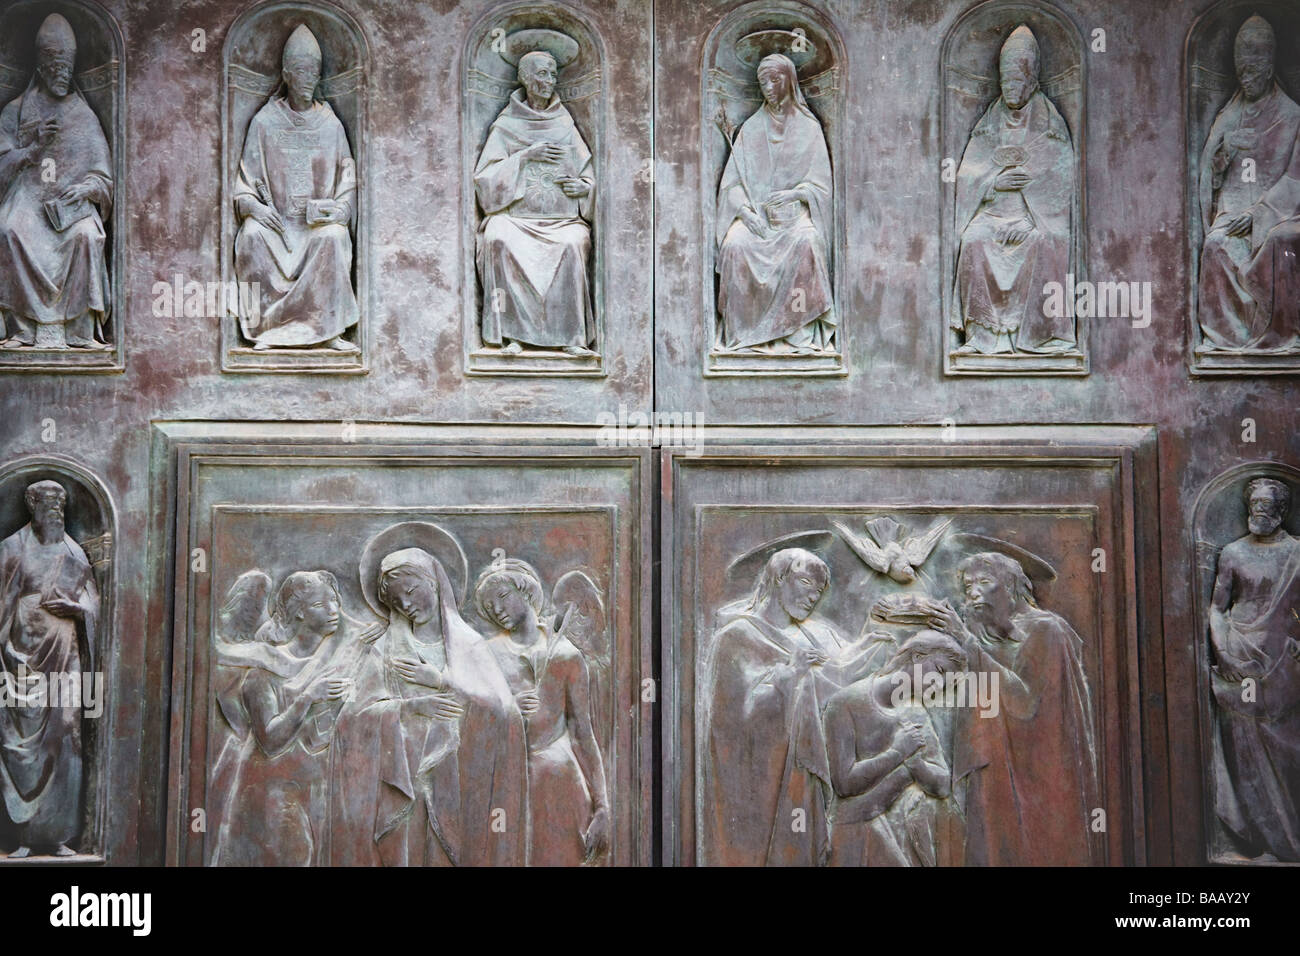 Decorative doors on the facade of the Duomo (cathedral) seen from Piazza del Duomo, Siena, Tuscany, Italy. Stock Photo